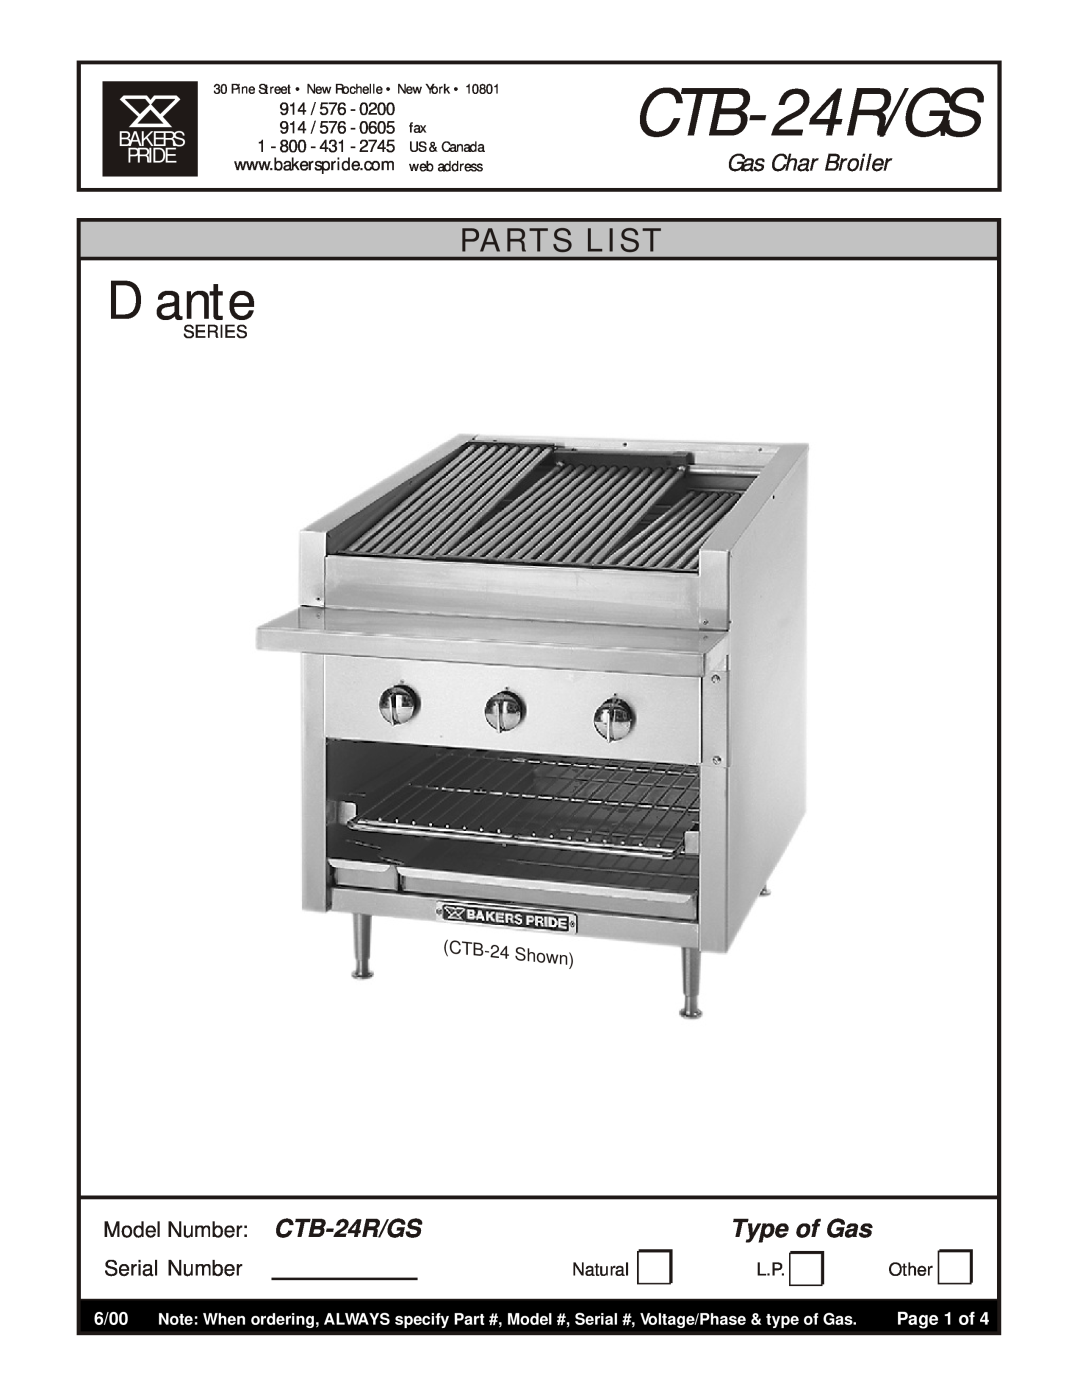 Bakers Pride Oven manual CTB-24R/GS, Gas Char Broiler, Type of Gas, 0200, 0605, 2745, Page 1 of, Dante, Parts List 